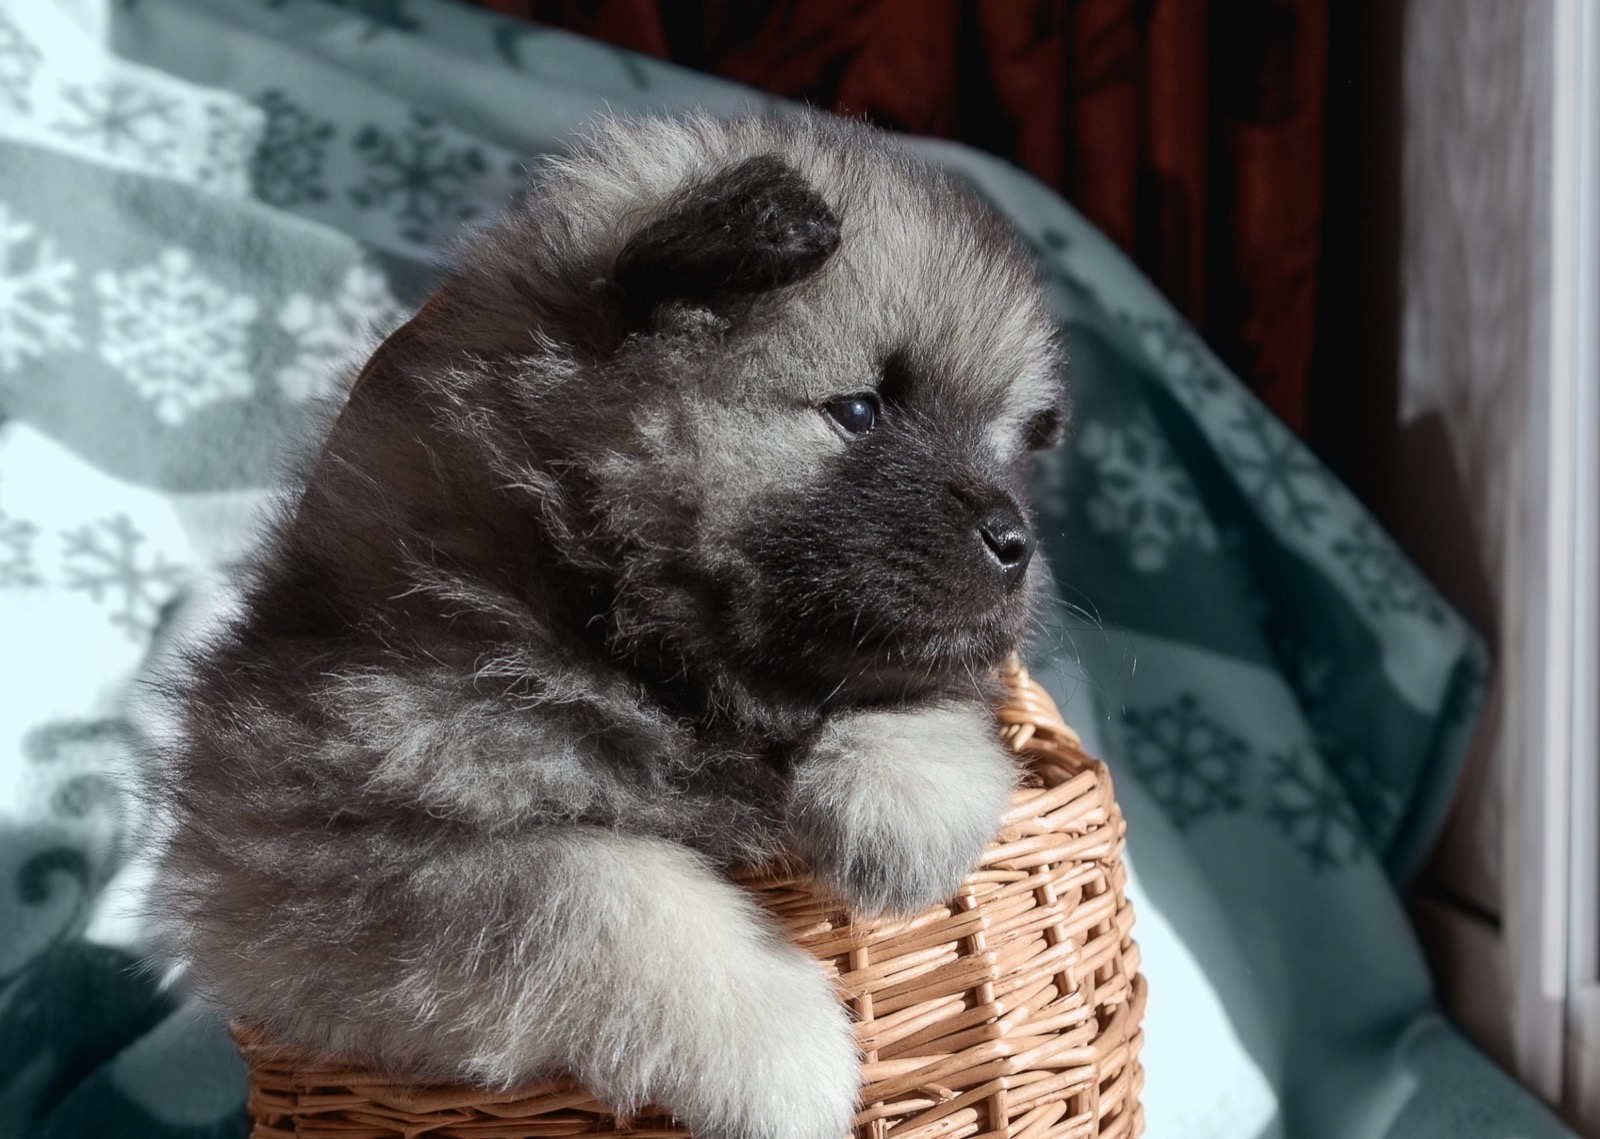 Can You Pass This General Knowledge Quiz While Being Distracted by Cute Puppies? Keeshond Puppy